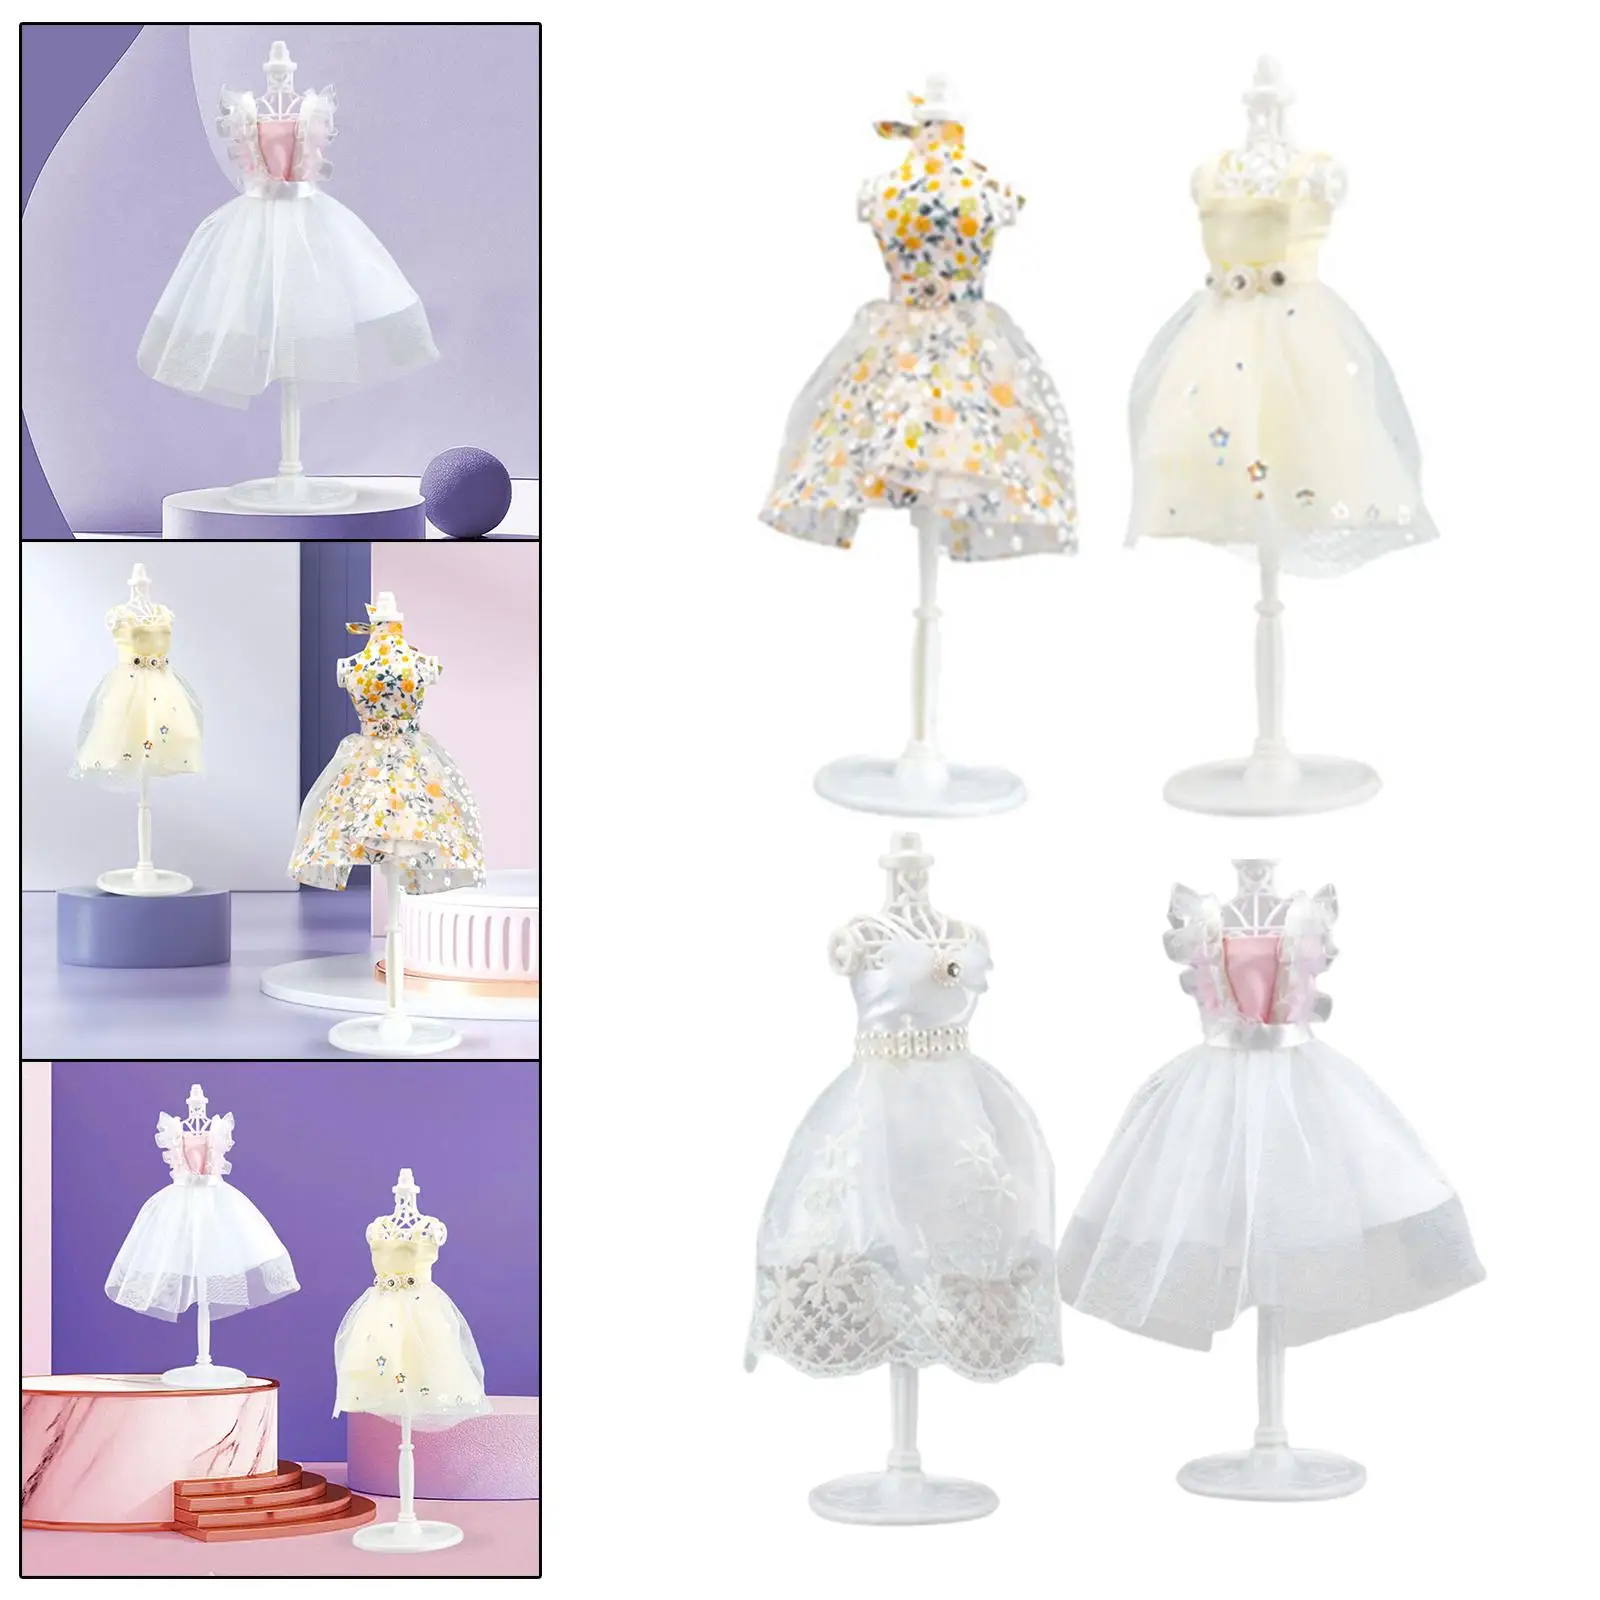 Doll Clothing design Learning Toys Doll Dress Making Set Creativity dress up Design Kit for Birthday Gift Party